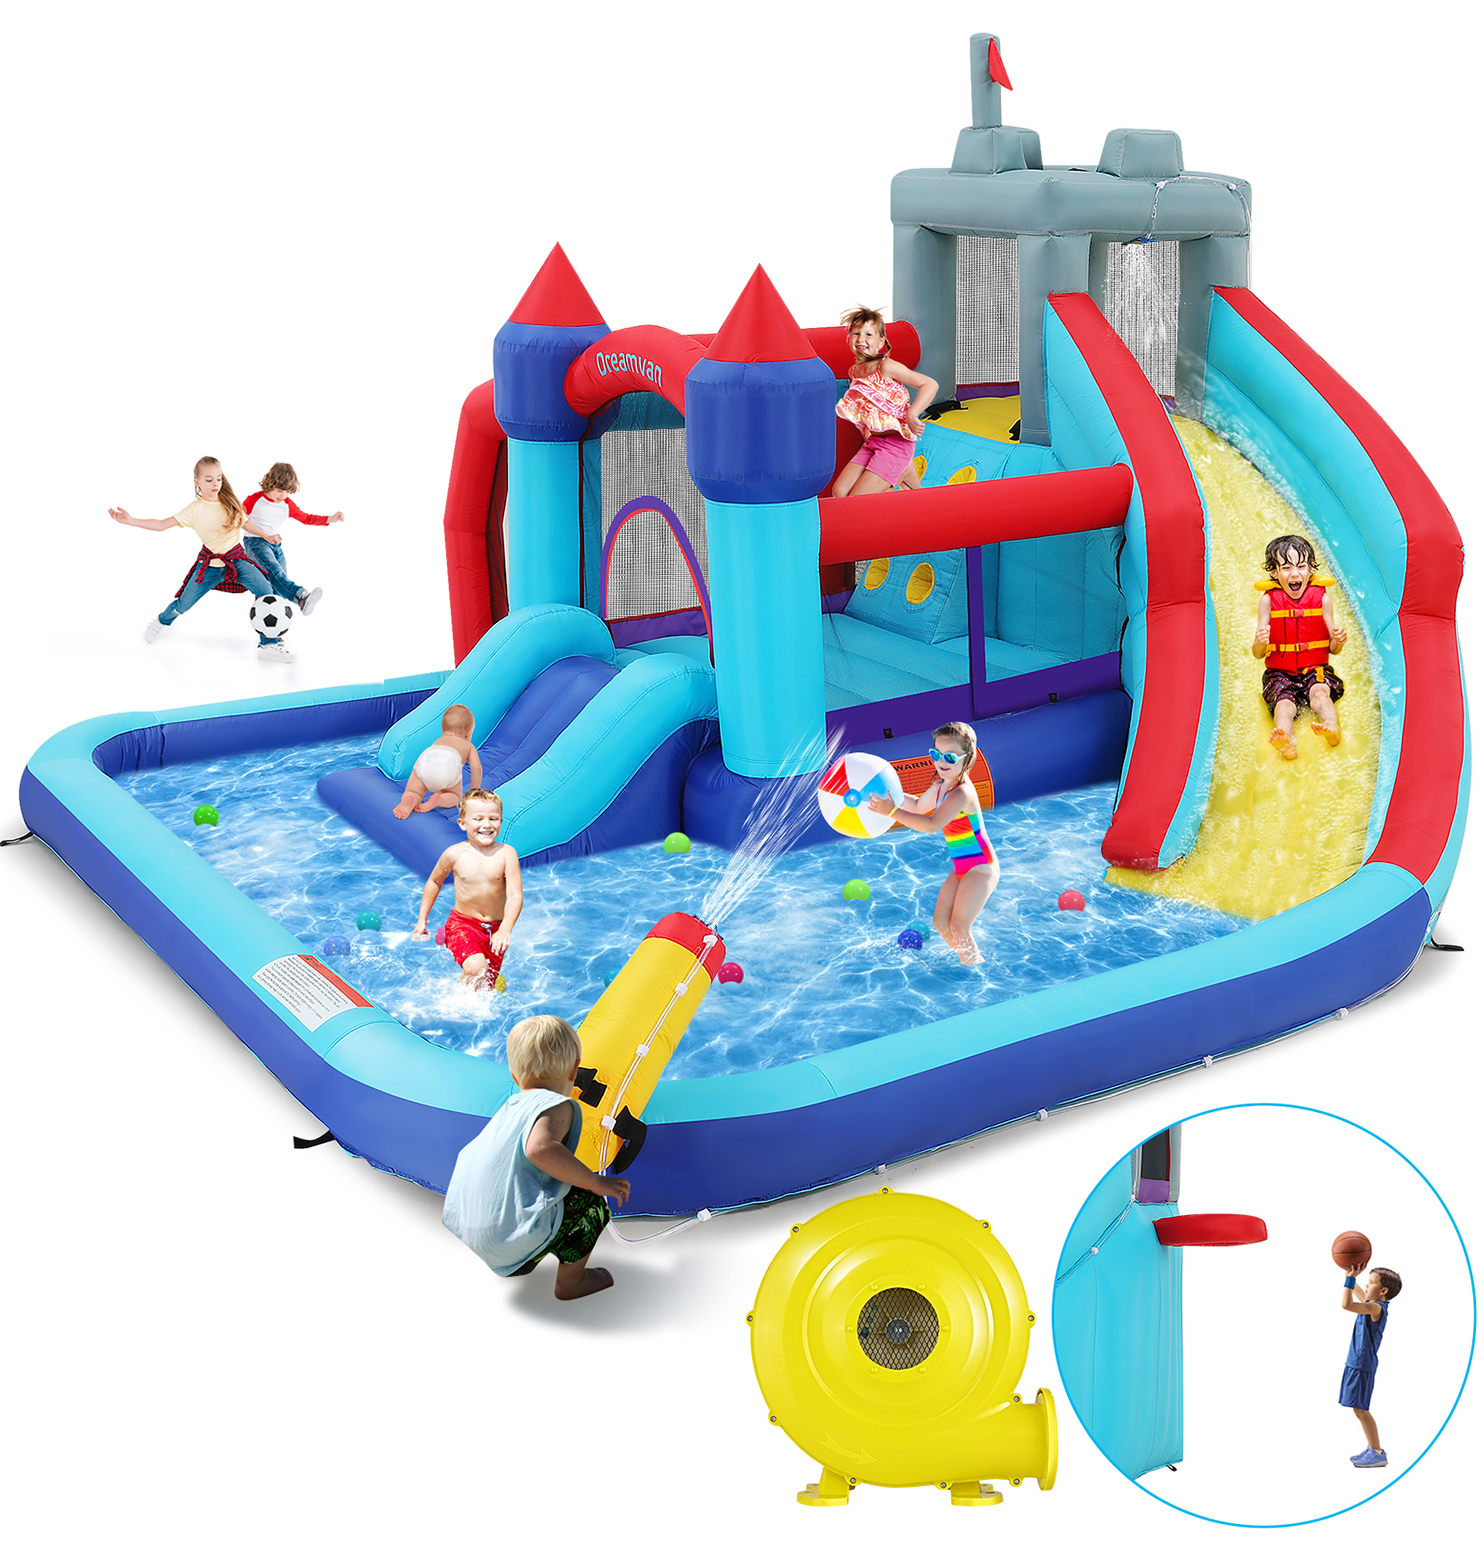 Qhomic Inflatable Bounce House for Toddlers with Blower, Children's Castle with Bouncing Slides, Climbing Wall, Bouncing Area, Basketball Hoop, Water Gun, Inflatable Water Slide with Football Area - image 1 of 12